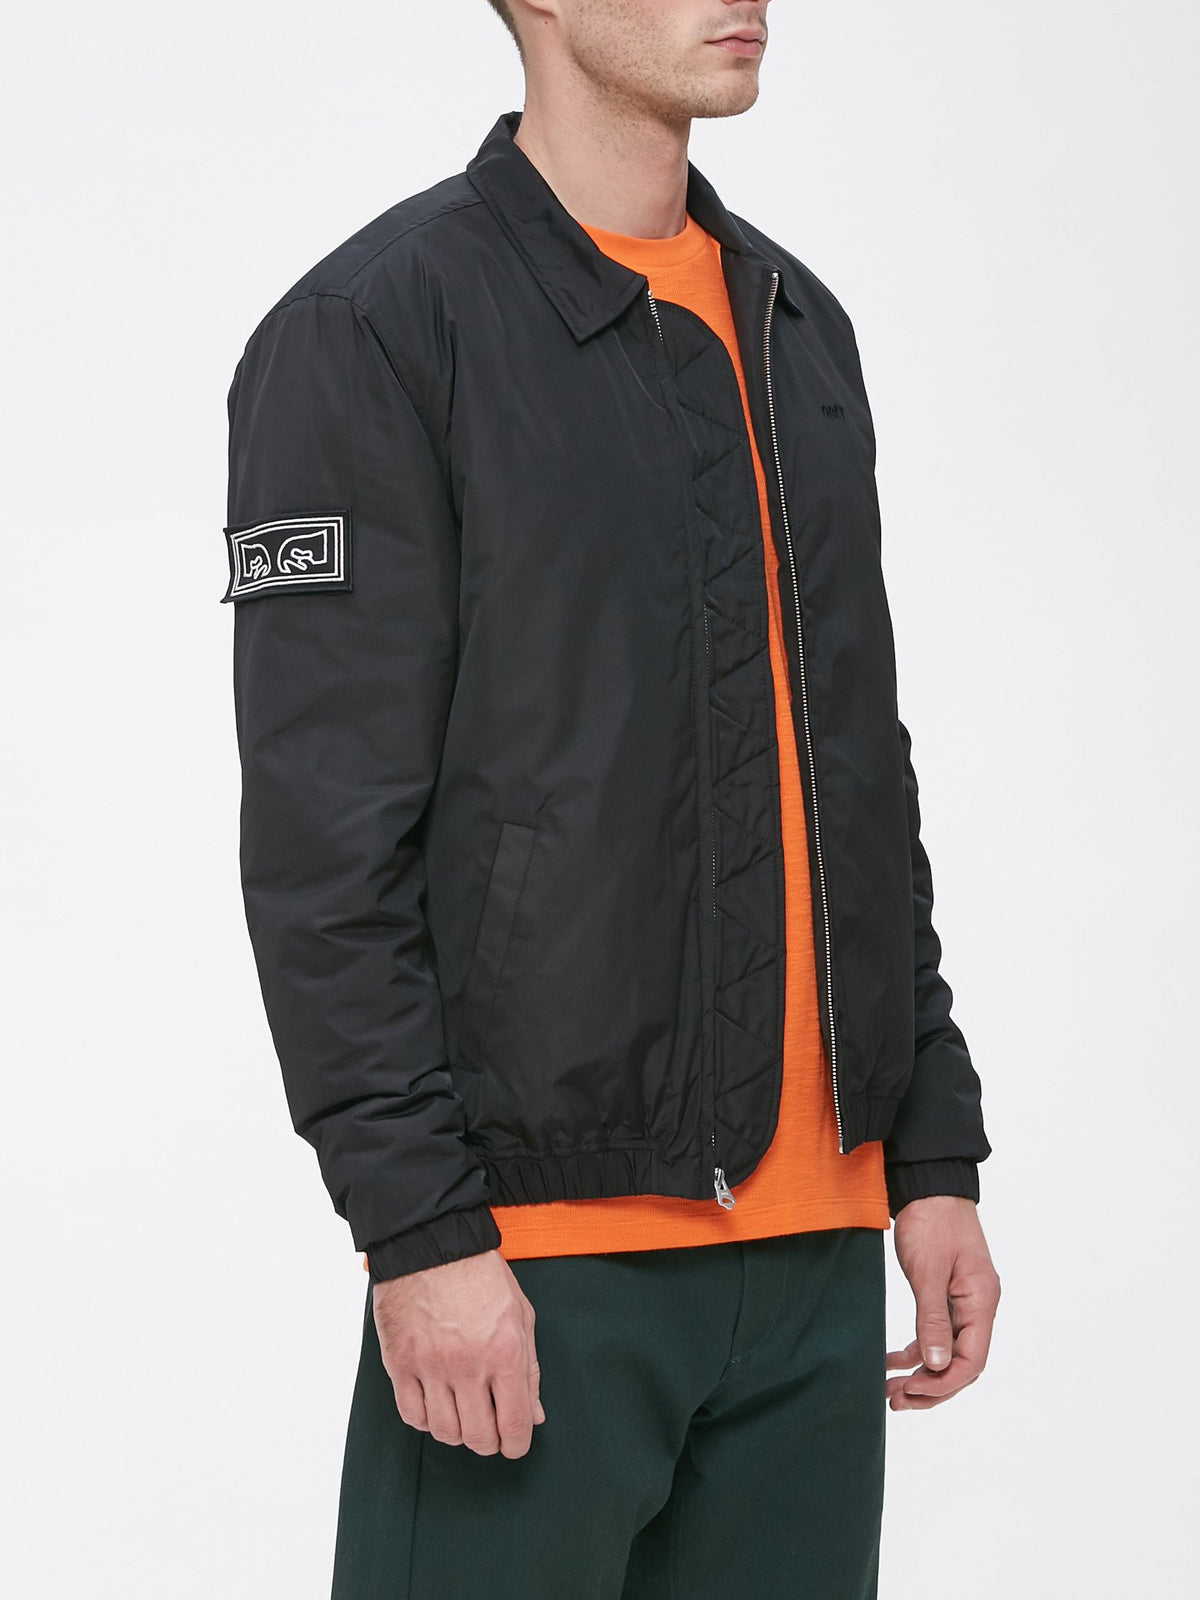 OBEY - Mission Men's Jacket, Black - The Giant Peach